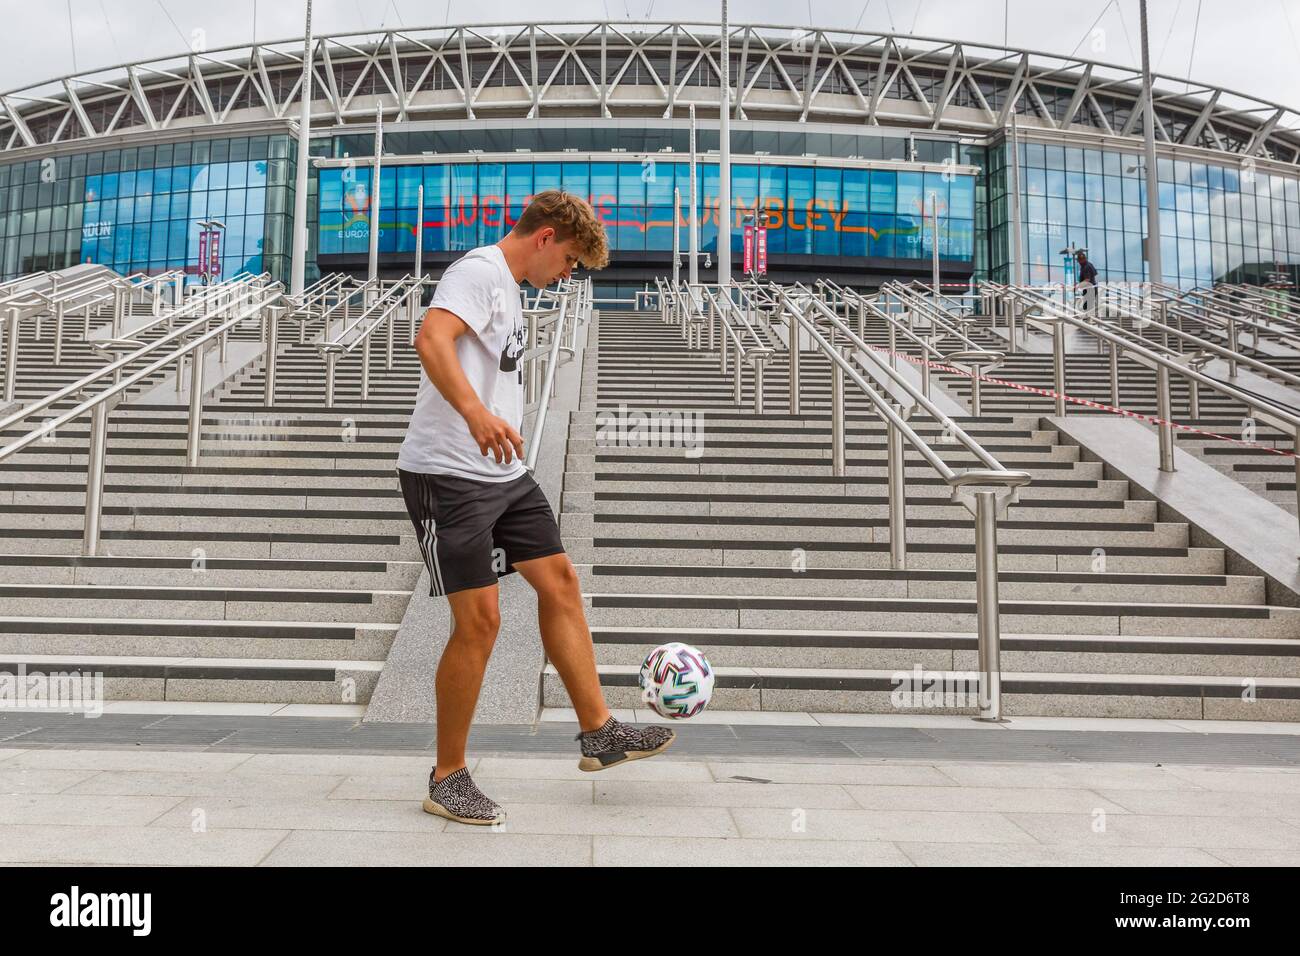 Wembley Stadium, Wembley Park, UK. 10th June 2021.   Euro 2020 ambassador, Scott Penders, showing his football skills outside Wembley Stadium, ahead of the start of the UEFA European Football Championship tomorrow.  Scott will be performing on the pitch at all Wembley matches.  Postponed by a year as the Coronavirus pandemic hit worldwide in 2020, the tournament starts on 11th June 2021, with Wembley Stadium hosting it's first match, England v Croatia, on 13th June 2021.   Amanda Rose/Alamy Live News Stock Photo